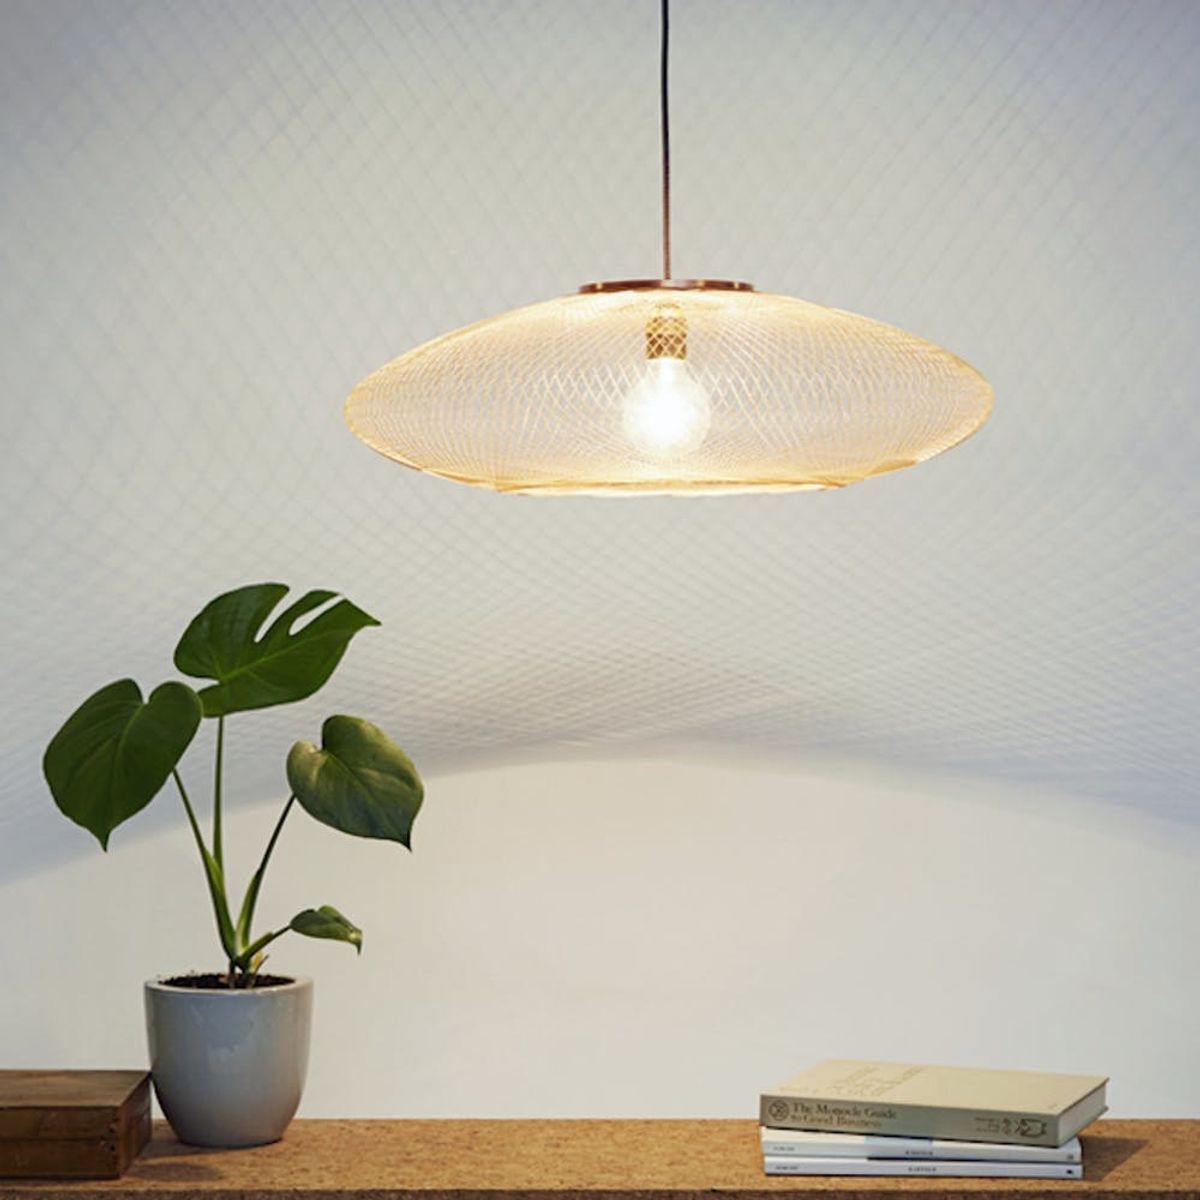 These Stylish Lamps Are Made by Robots